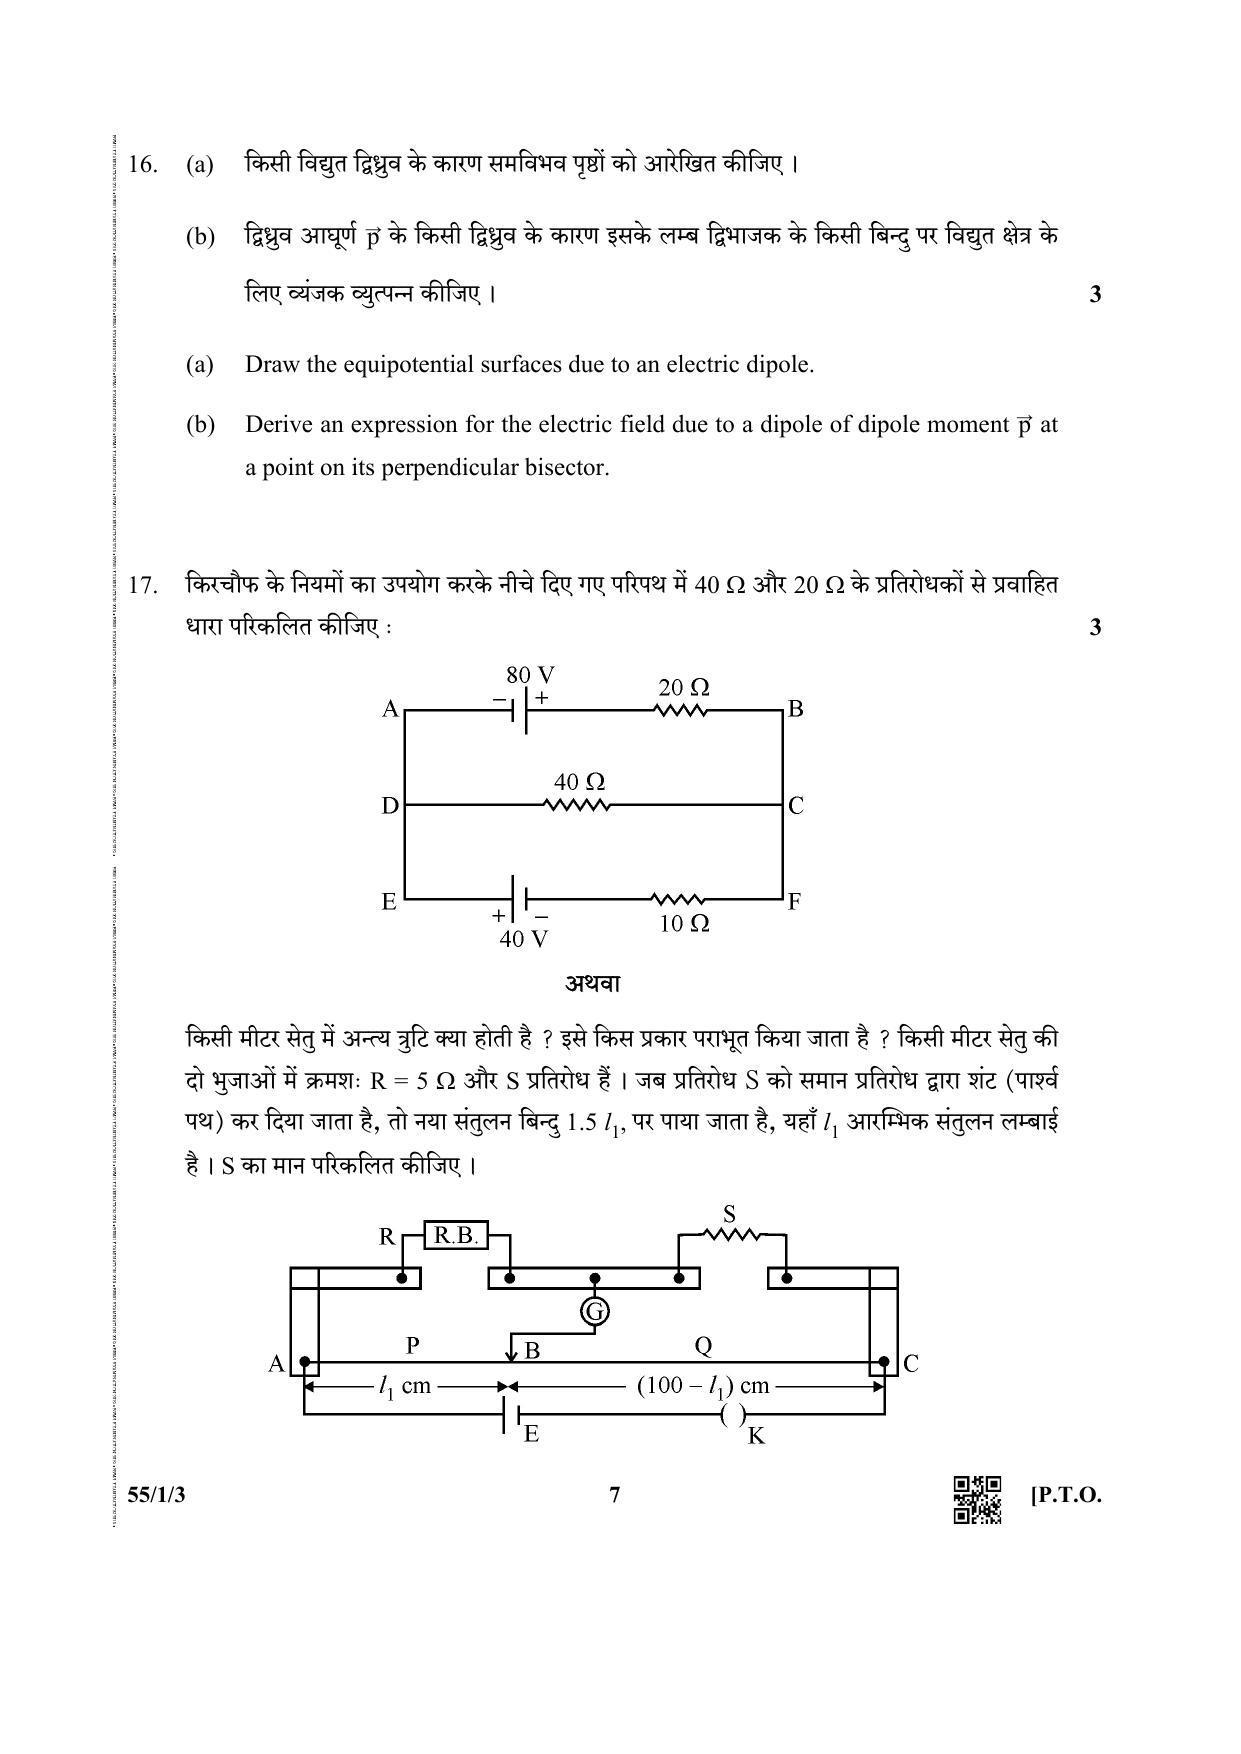 CBSE Class 12 55-1-3 (Physics) 2019 Question Paper - Page 7